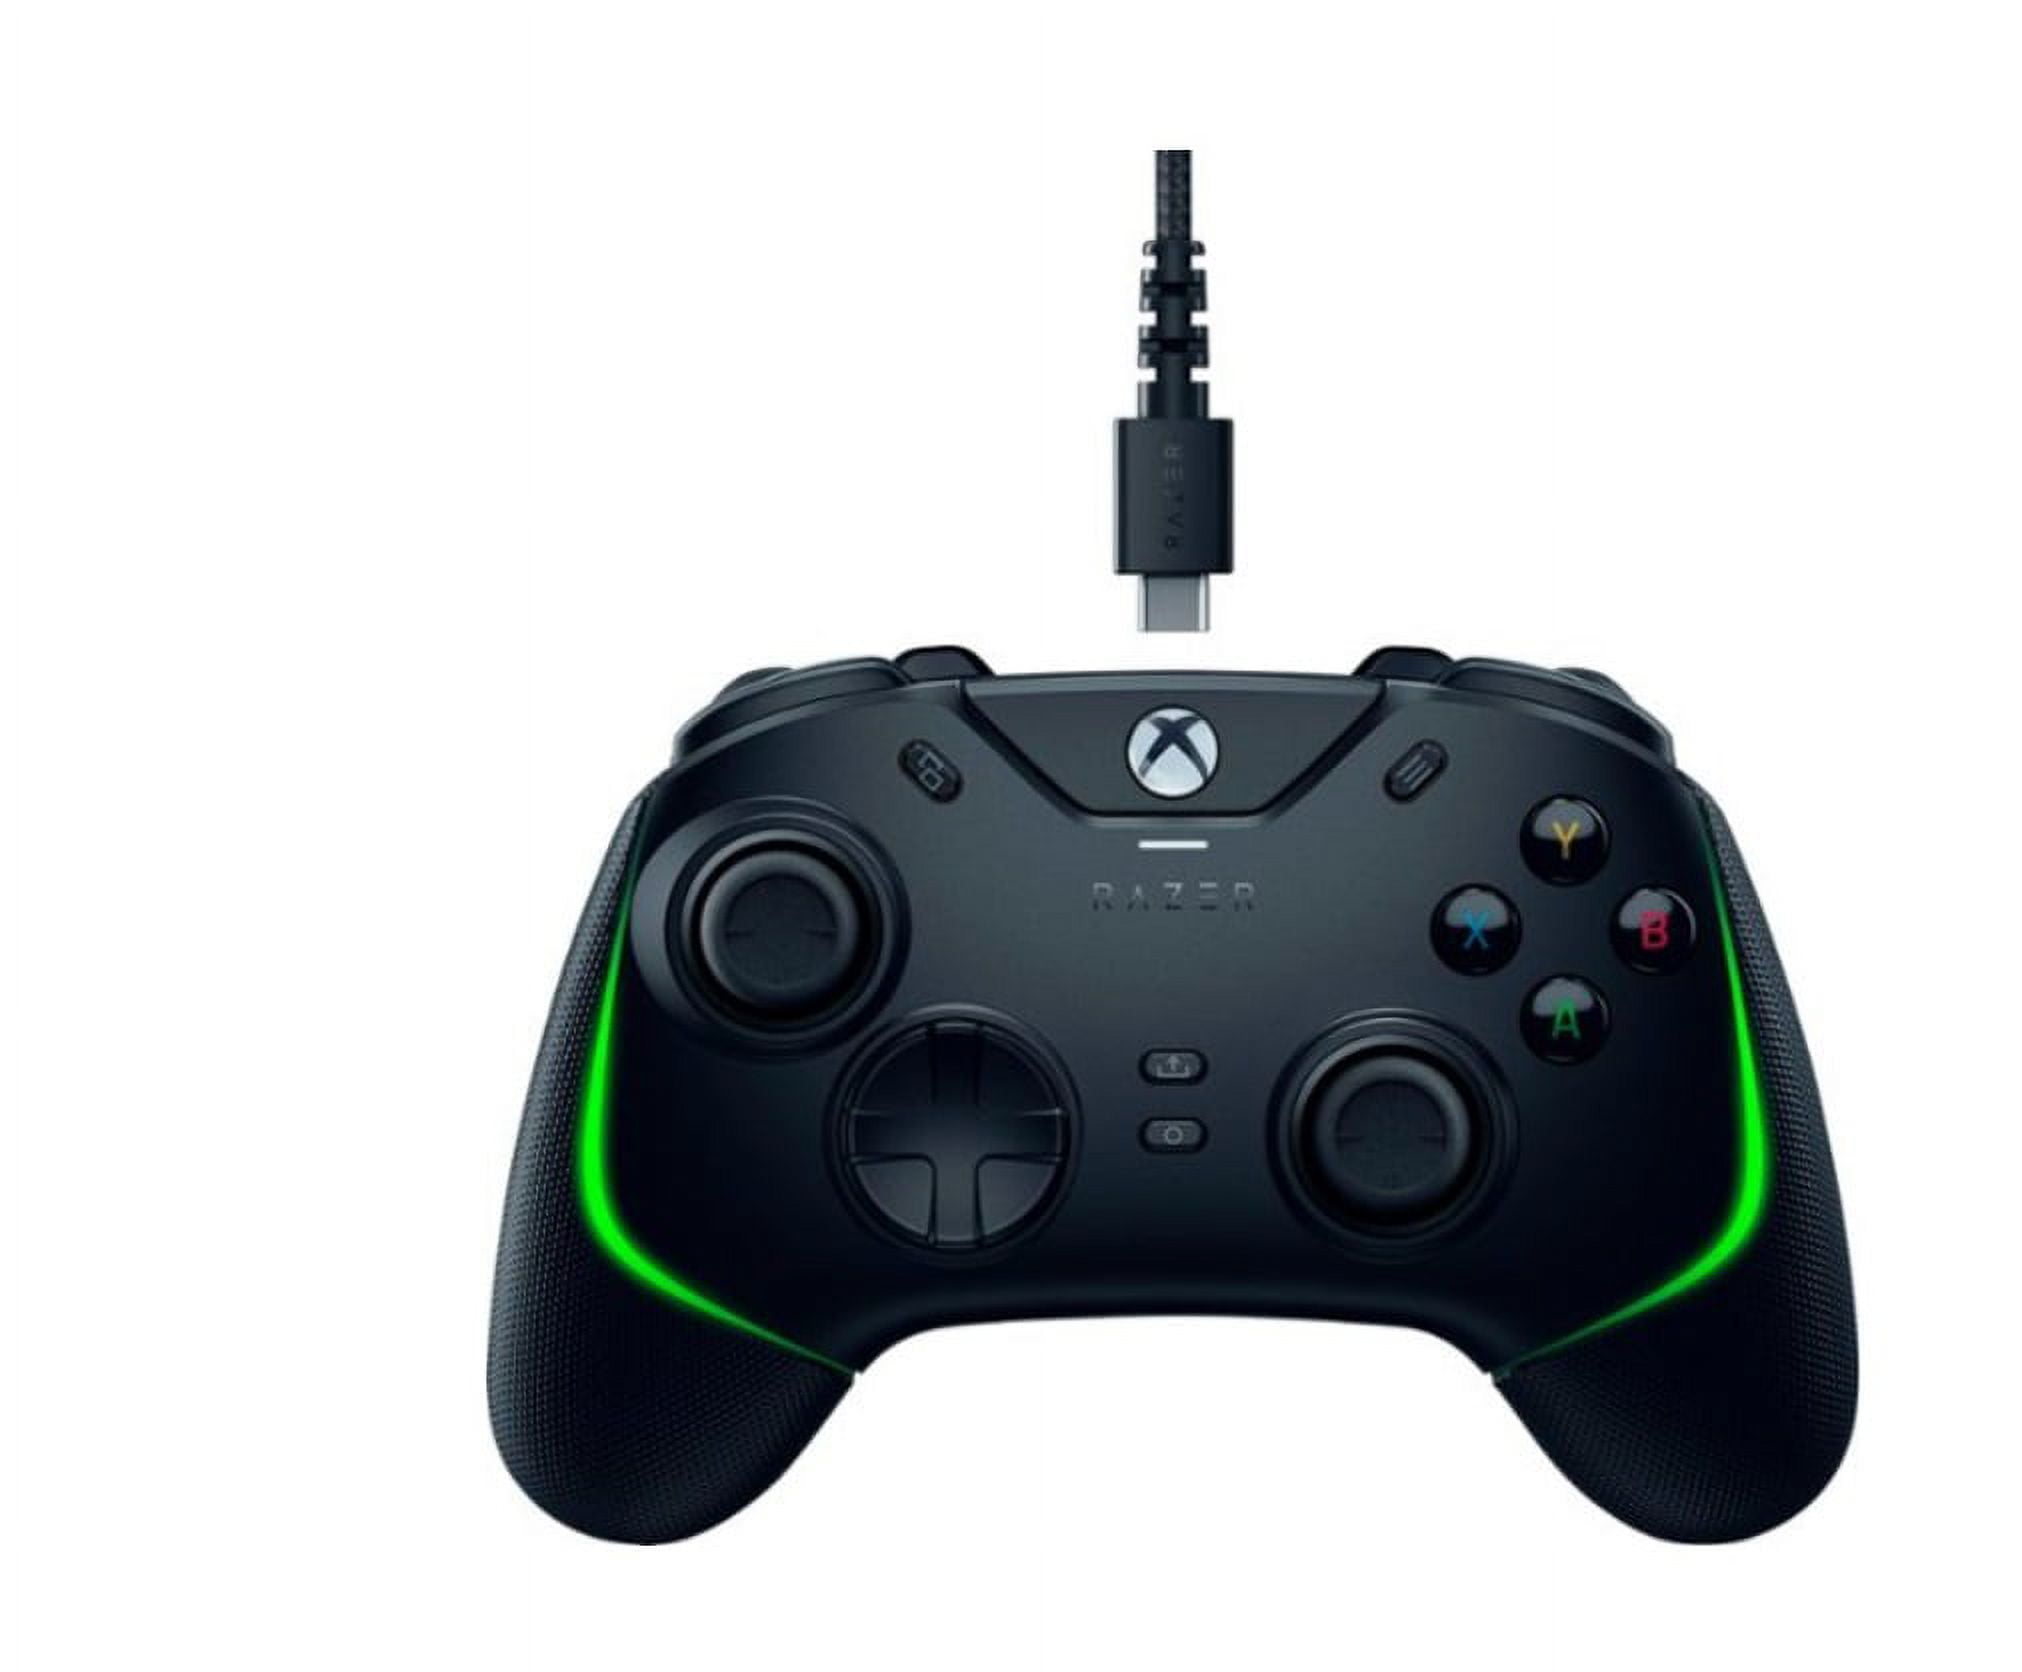 Razer Wolverine V2 Wired Gaming Controller for Xbox Series X|S, Xbox One,  PC: Remappable Front-Facing Buttons - Mecha-Tactile Action Buttons and  D-Pad